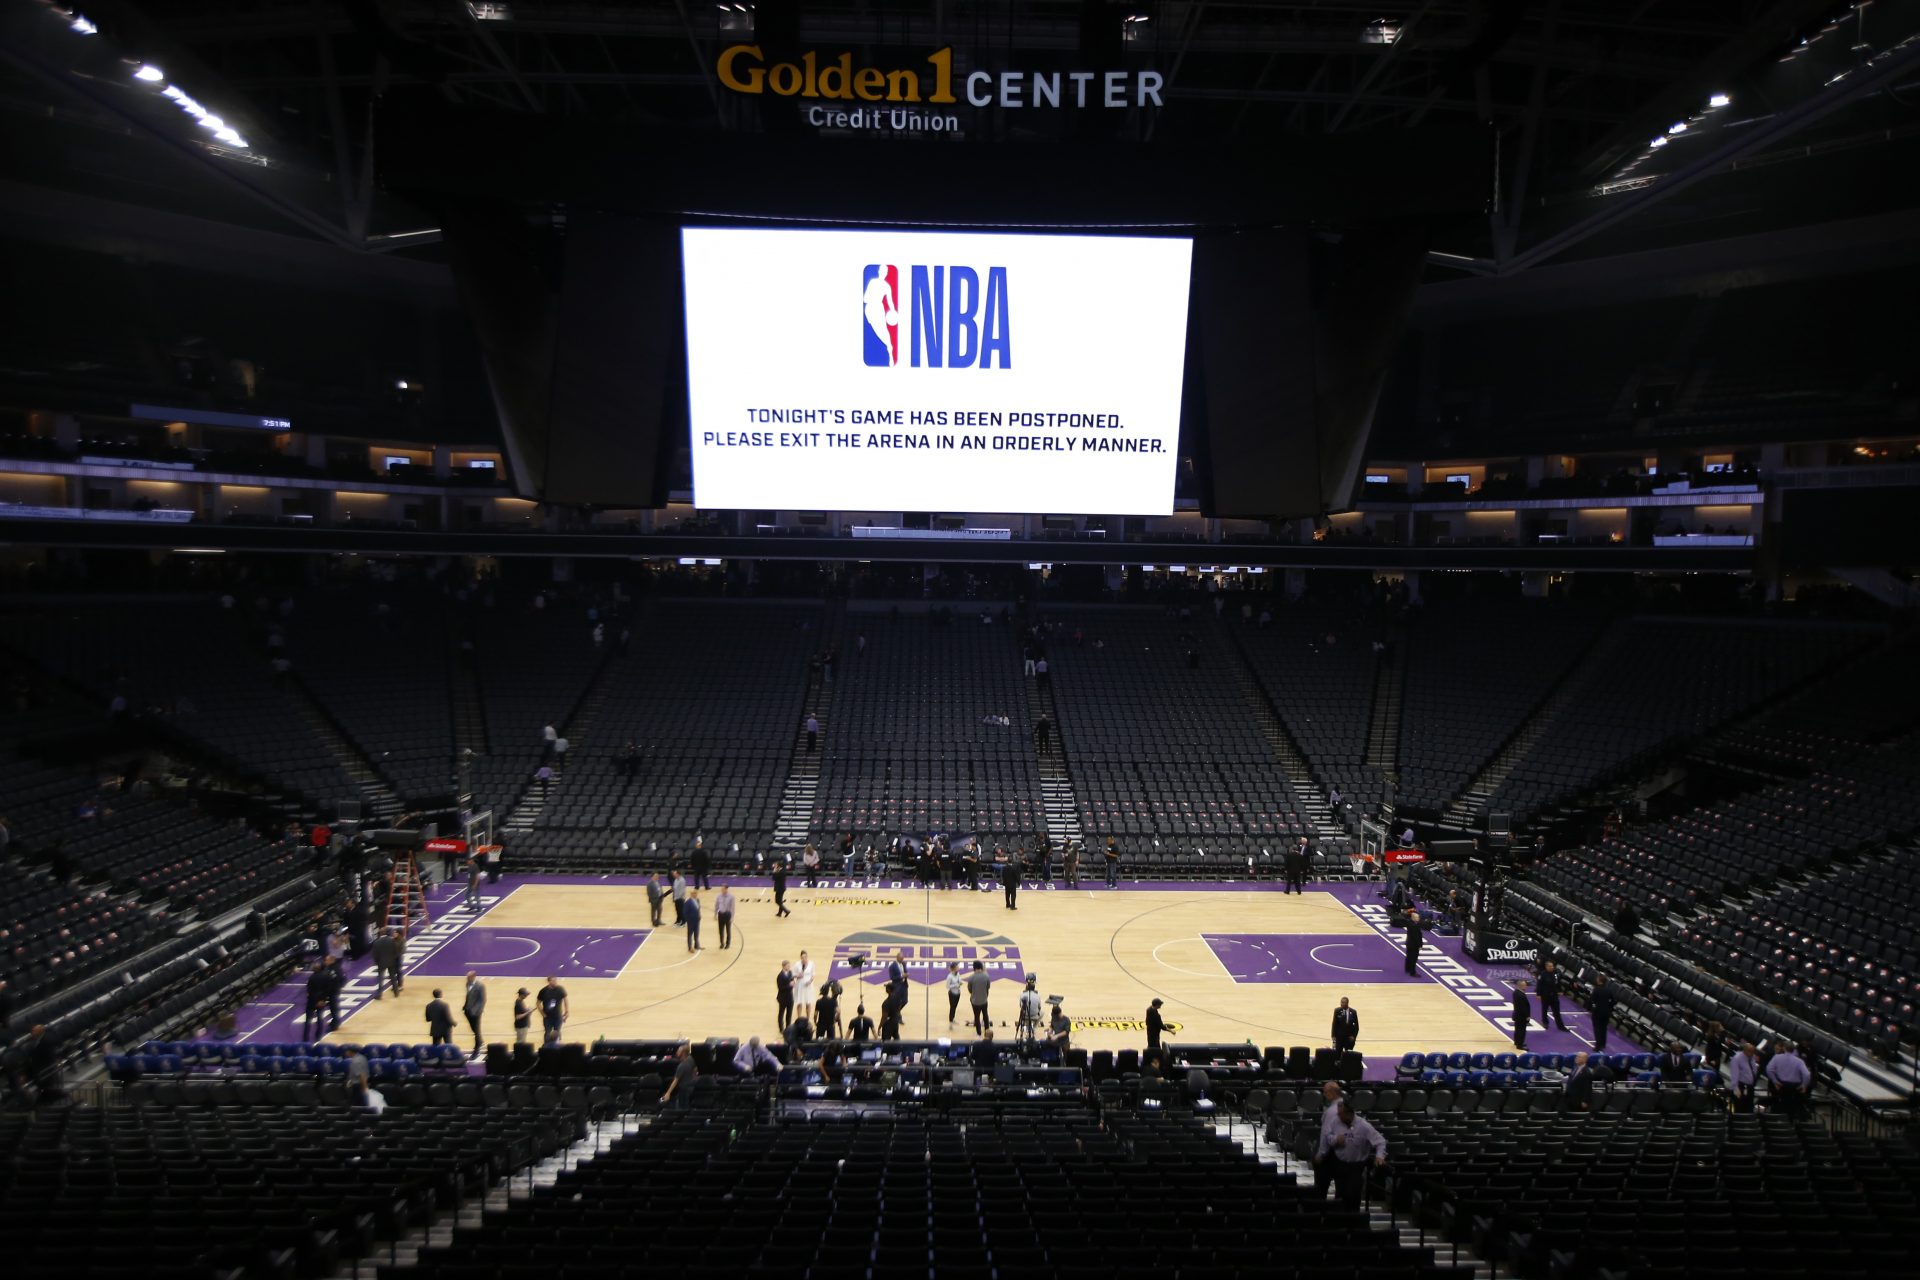 The Golden 1 Center center empties out after the NBA basketball game between the New Orleans Pelicans and Sacramento Kings was postponed at the last minute in Sacramento, Calif., Wednesday, March 11, 2020. The postponement was due to what the league said was an "abundance of caution," because official Courtney Kirkland, who was scheduled to work the game, had worked the Utah Jazz game earlier in the week. A player for the Jazz tested positive for the coronavirus.